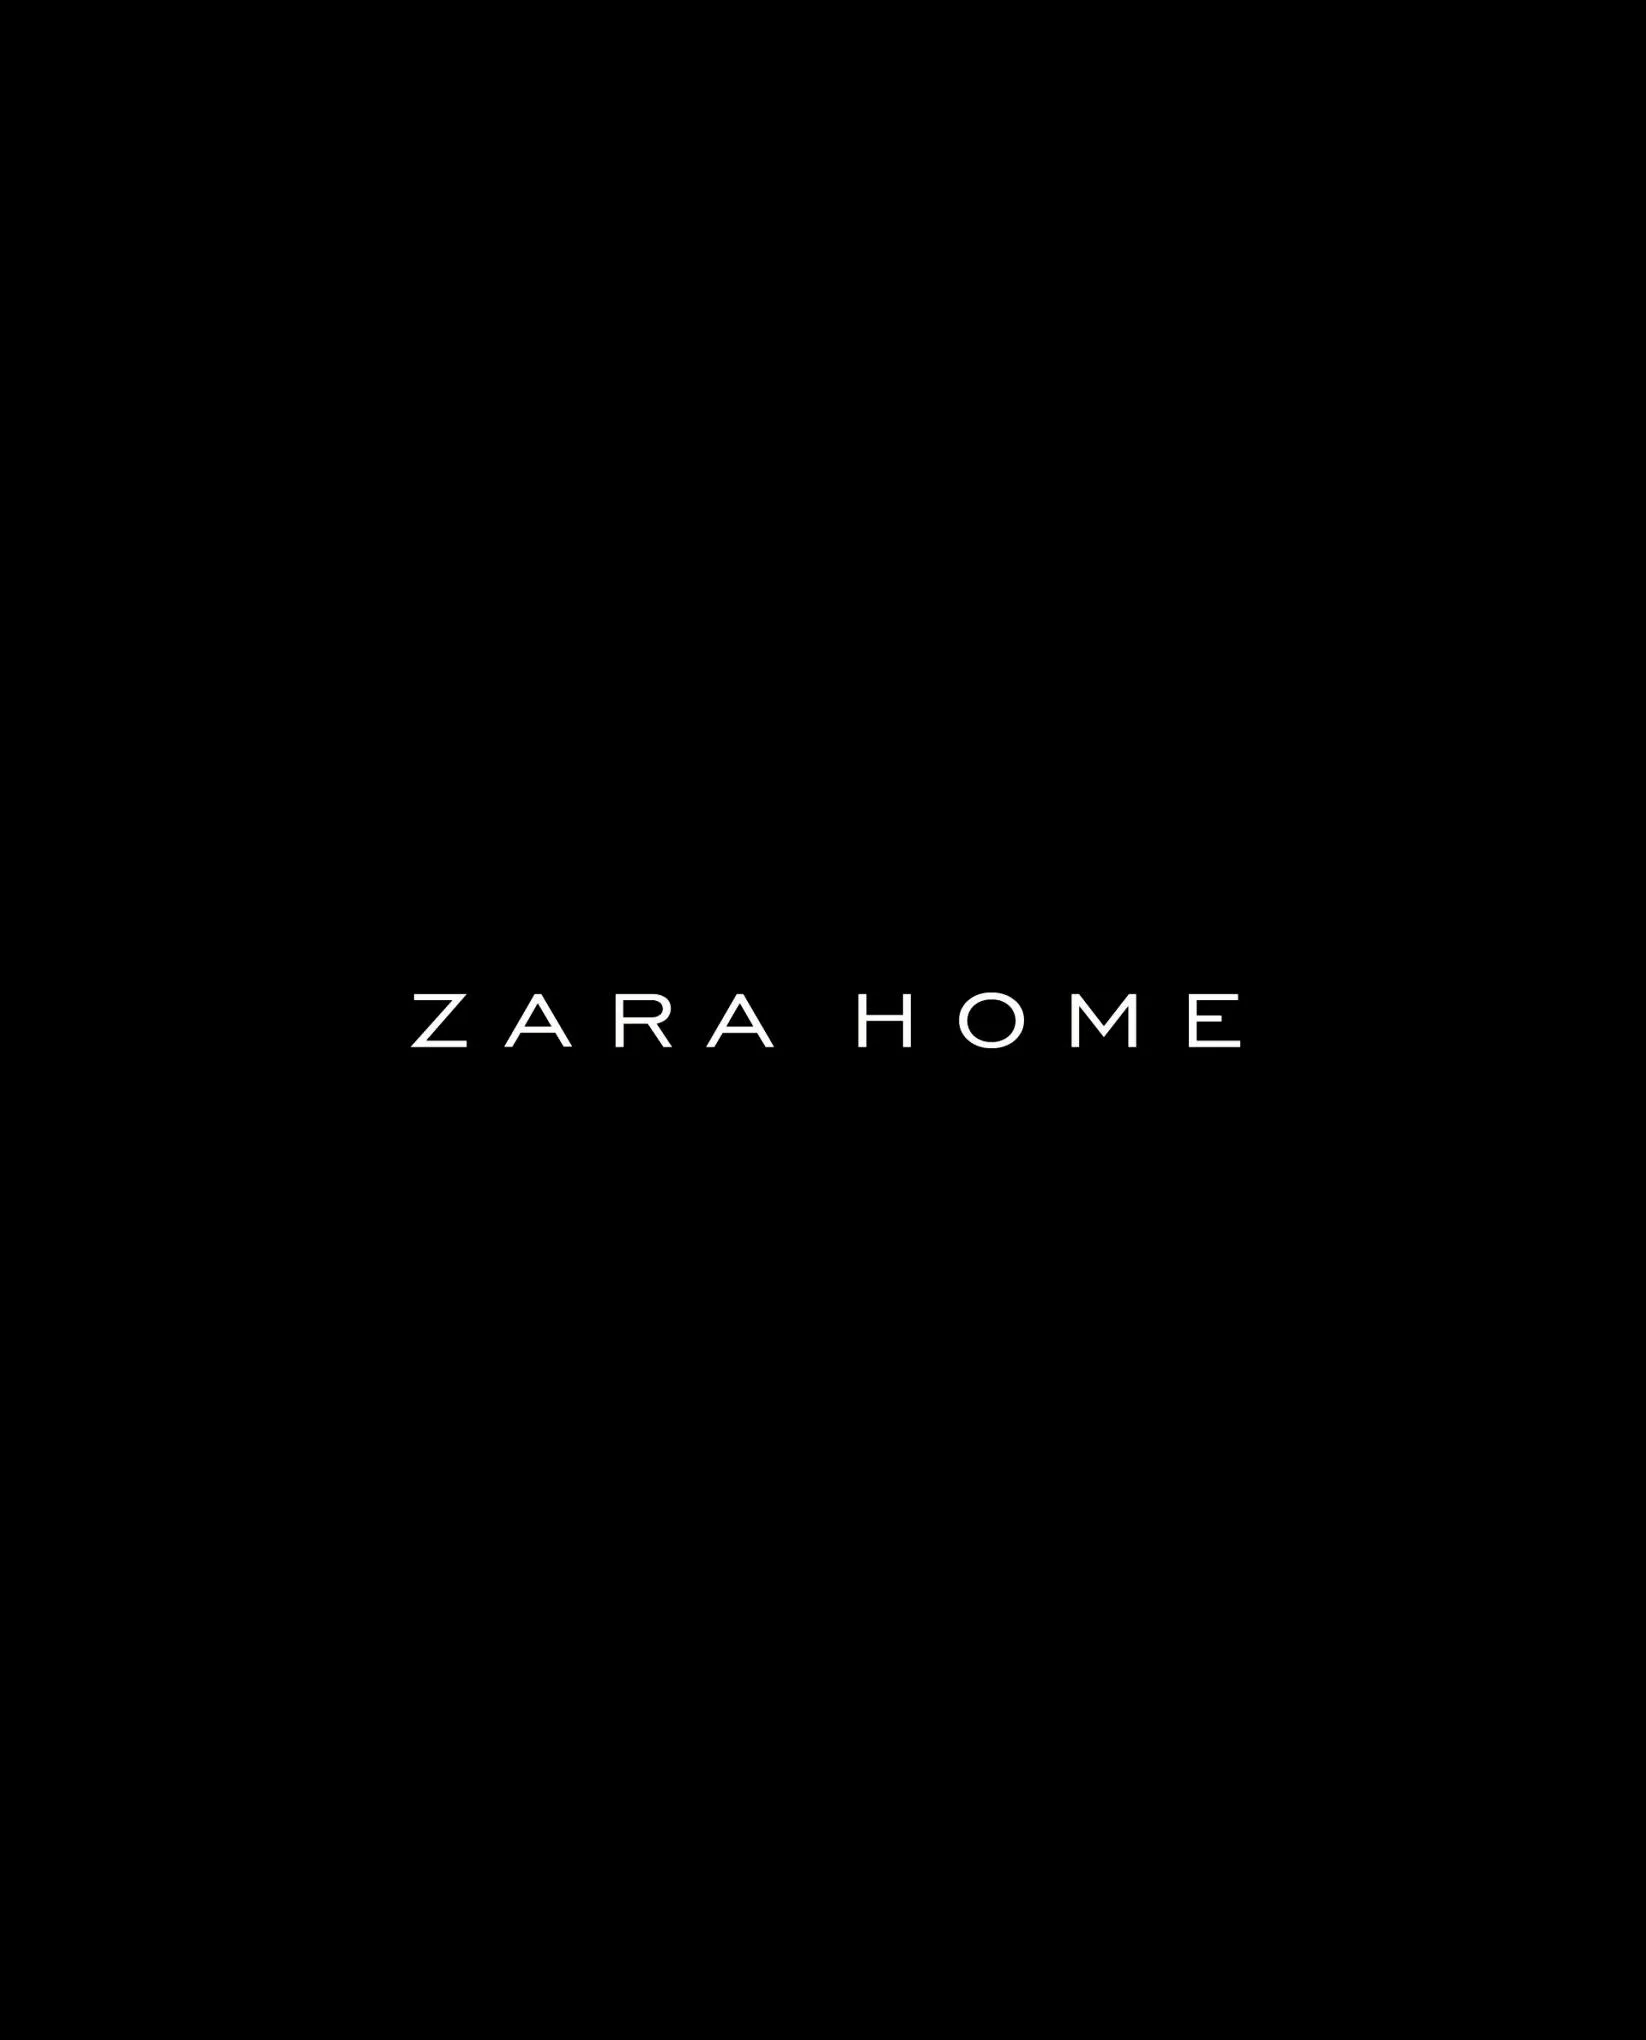 Catalogue Zara Home by Vincent Van Duysent, page 00012